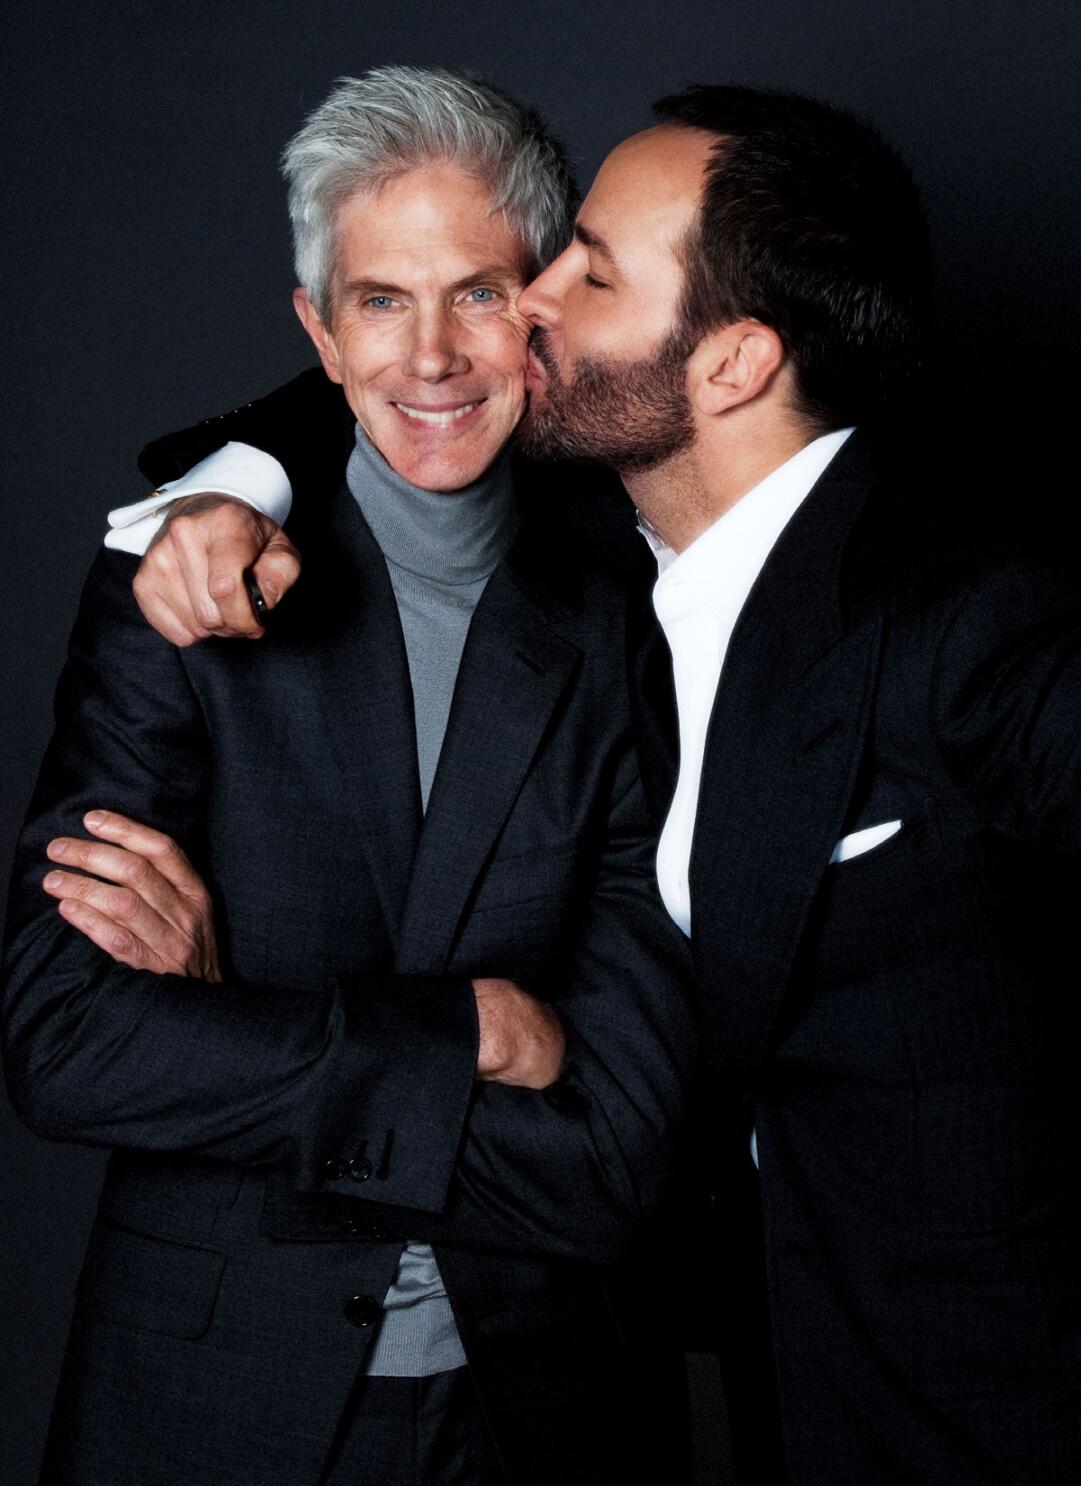 Tom Ford marries partner of 27 years